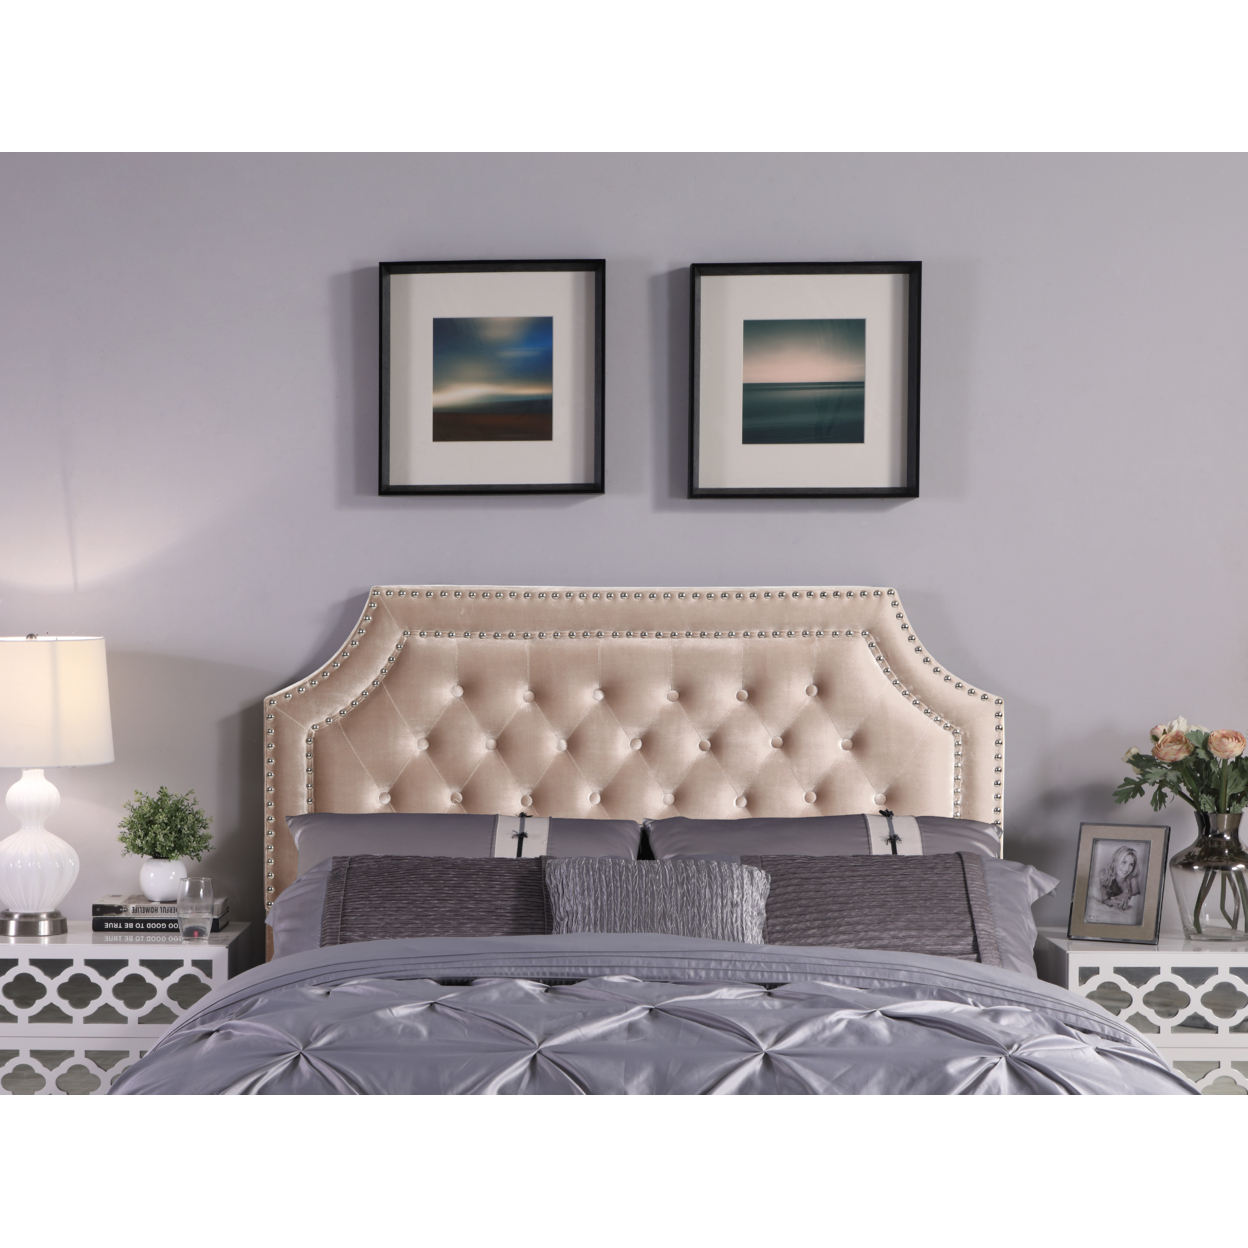 Horus Headboard Velvet Upholstered Button Tufted Double Row Silver Nailhead Trim - Taupe, Queen